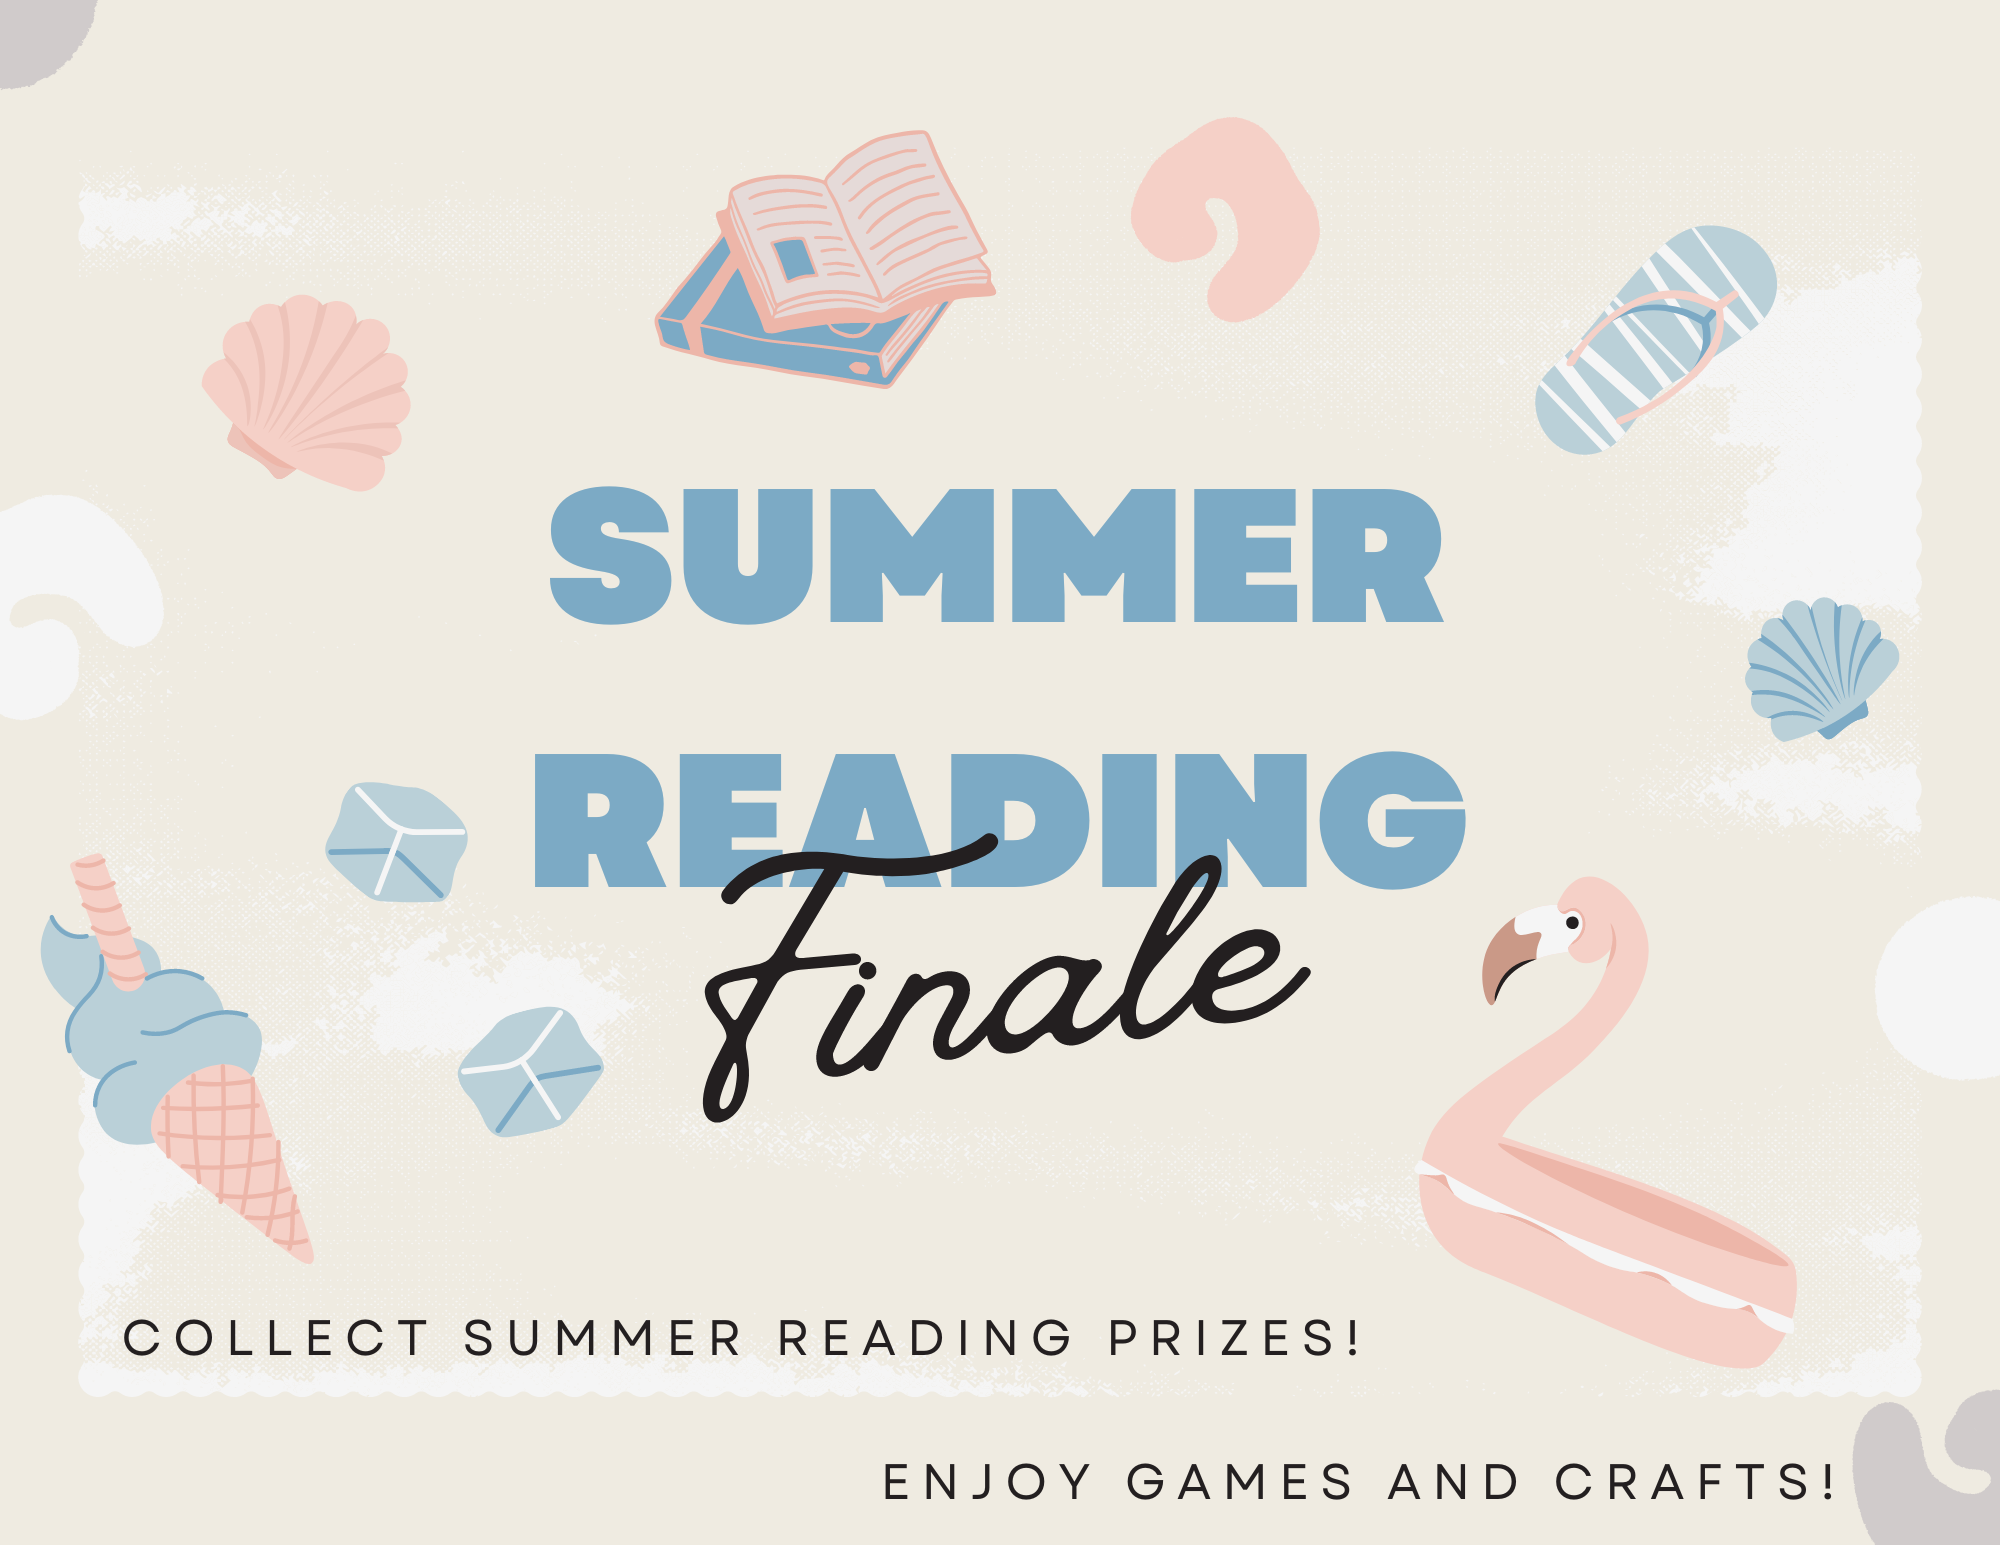 Text: Summer Reading Finale, collect summer reading prizes, enjoy games and crafts. Graphics: books, pool float, ice cream.